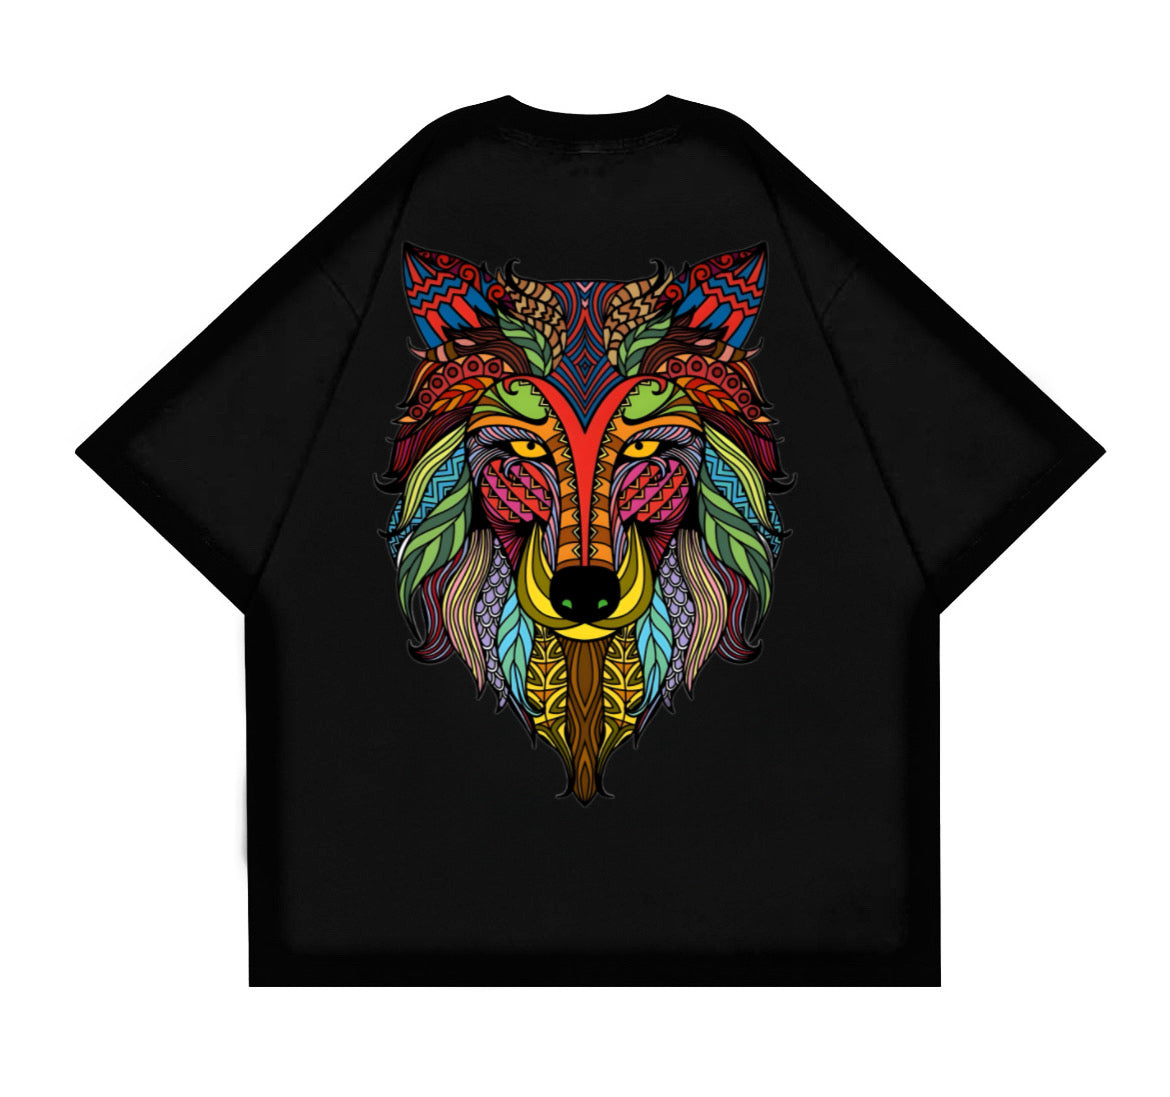 EXCLUSIVE EDITION 0.3 PSYCHEDELIC WOLF